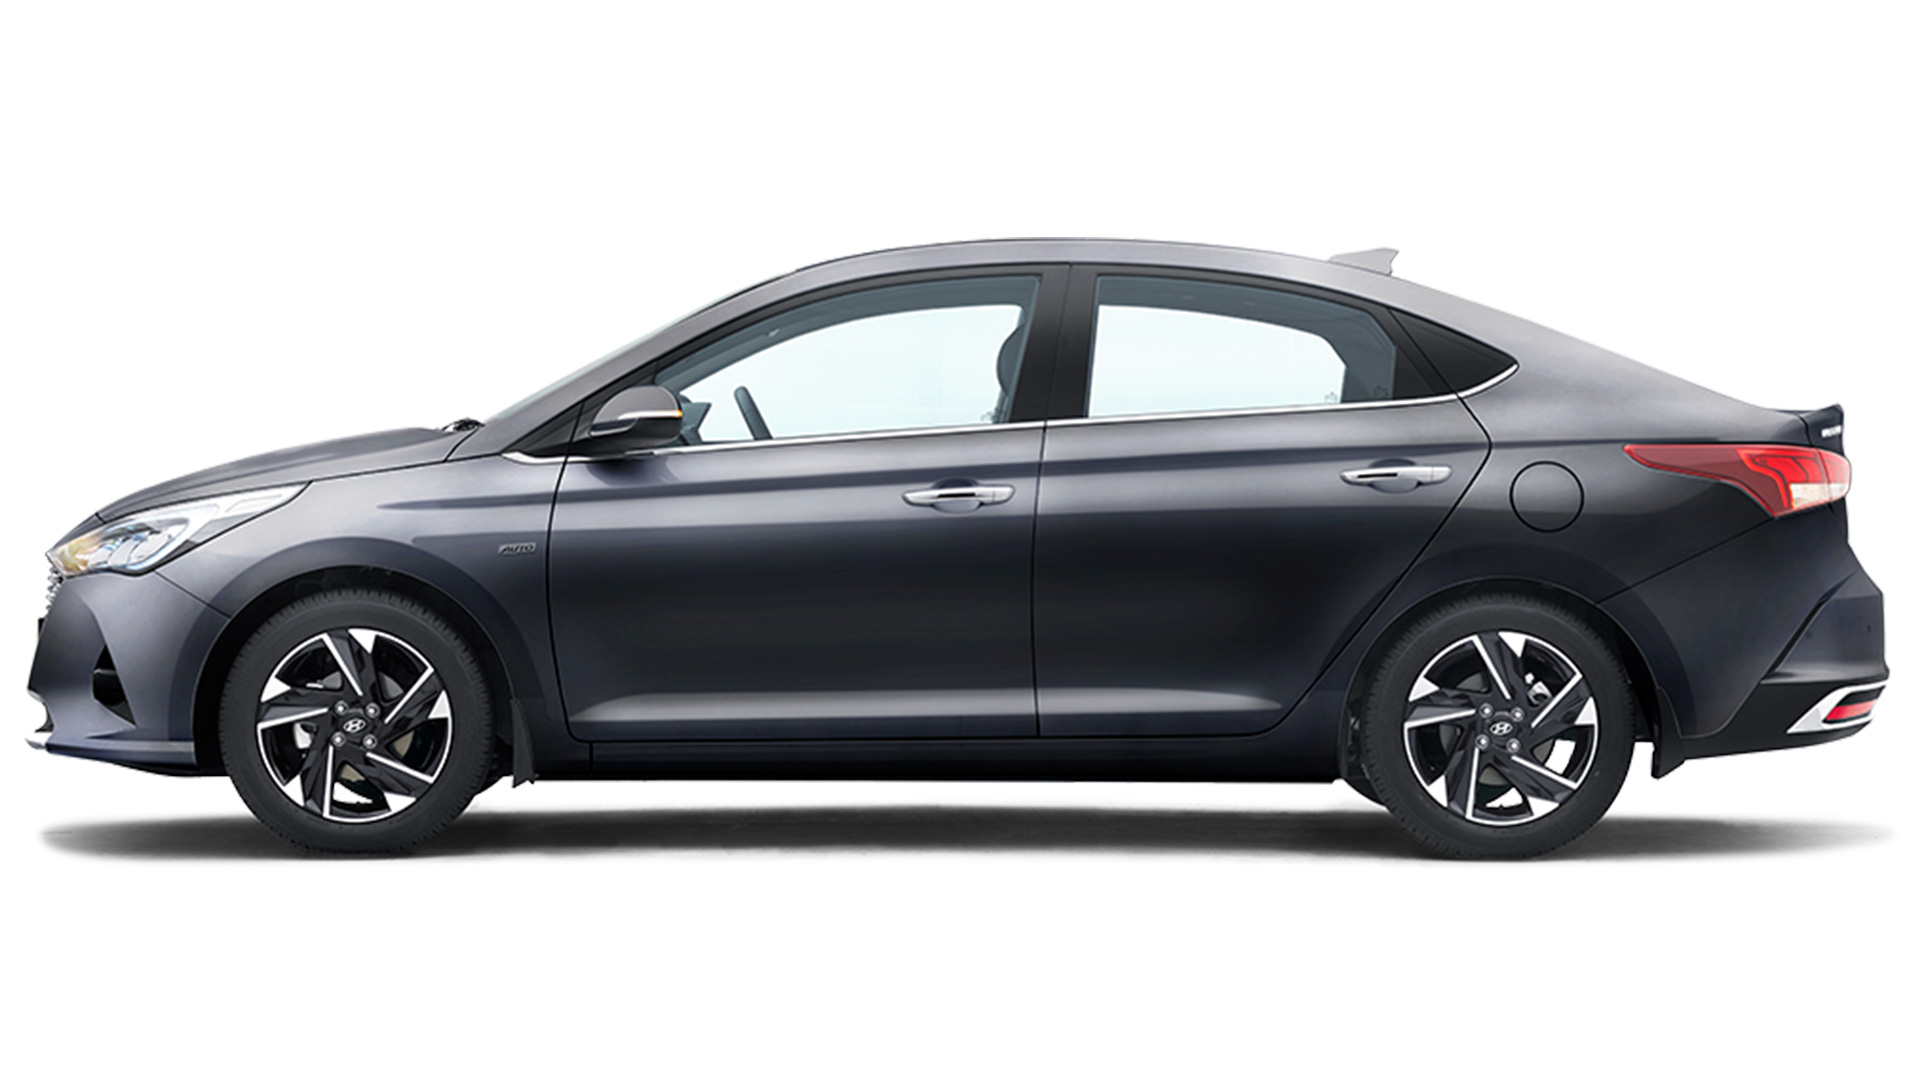 Hyundai Verna 2020 - Price in India, Mileage, Reviews, Colours,  Specification, Images - Overdrive